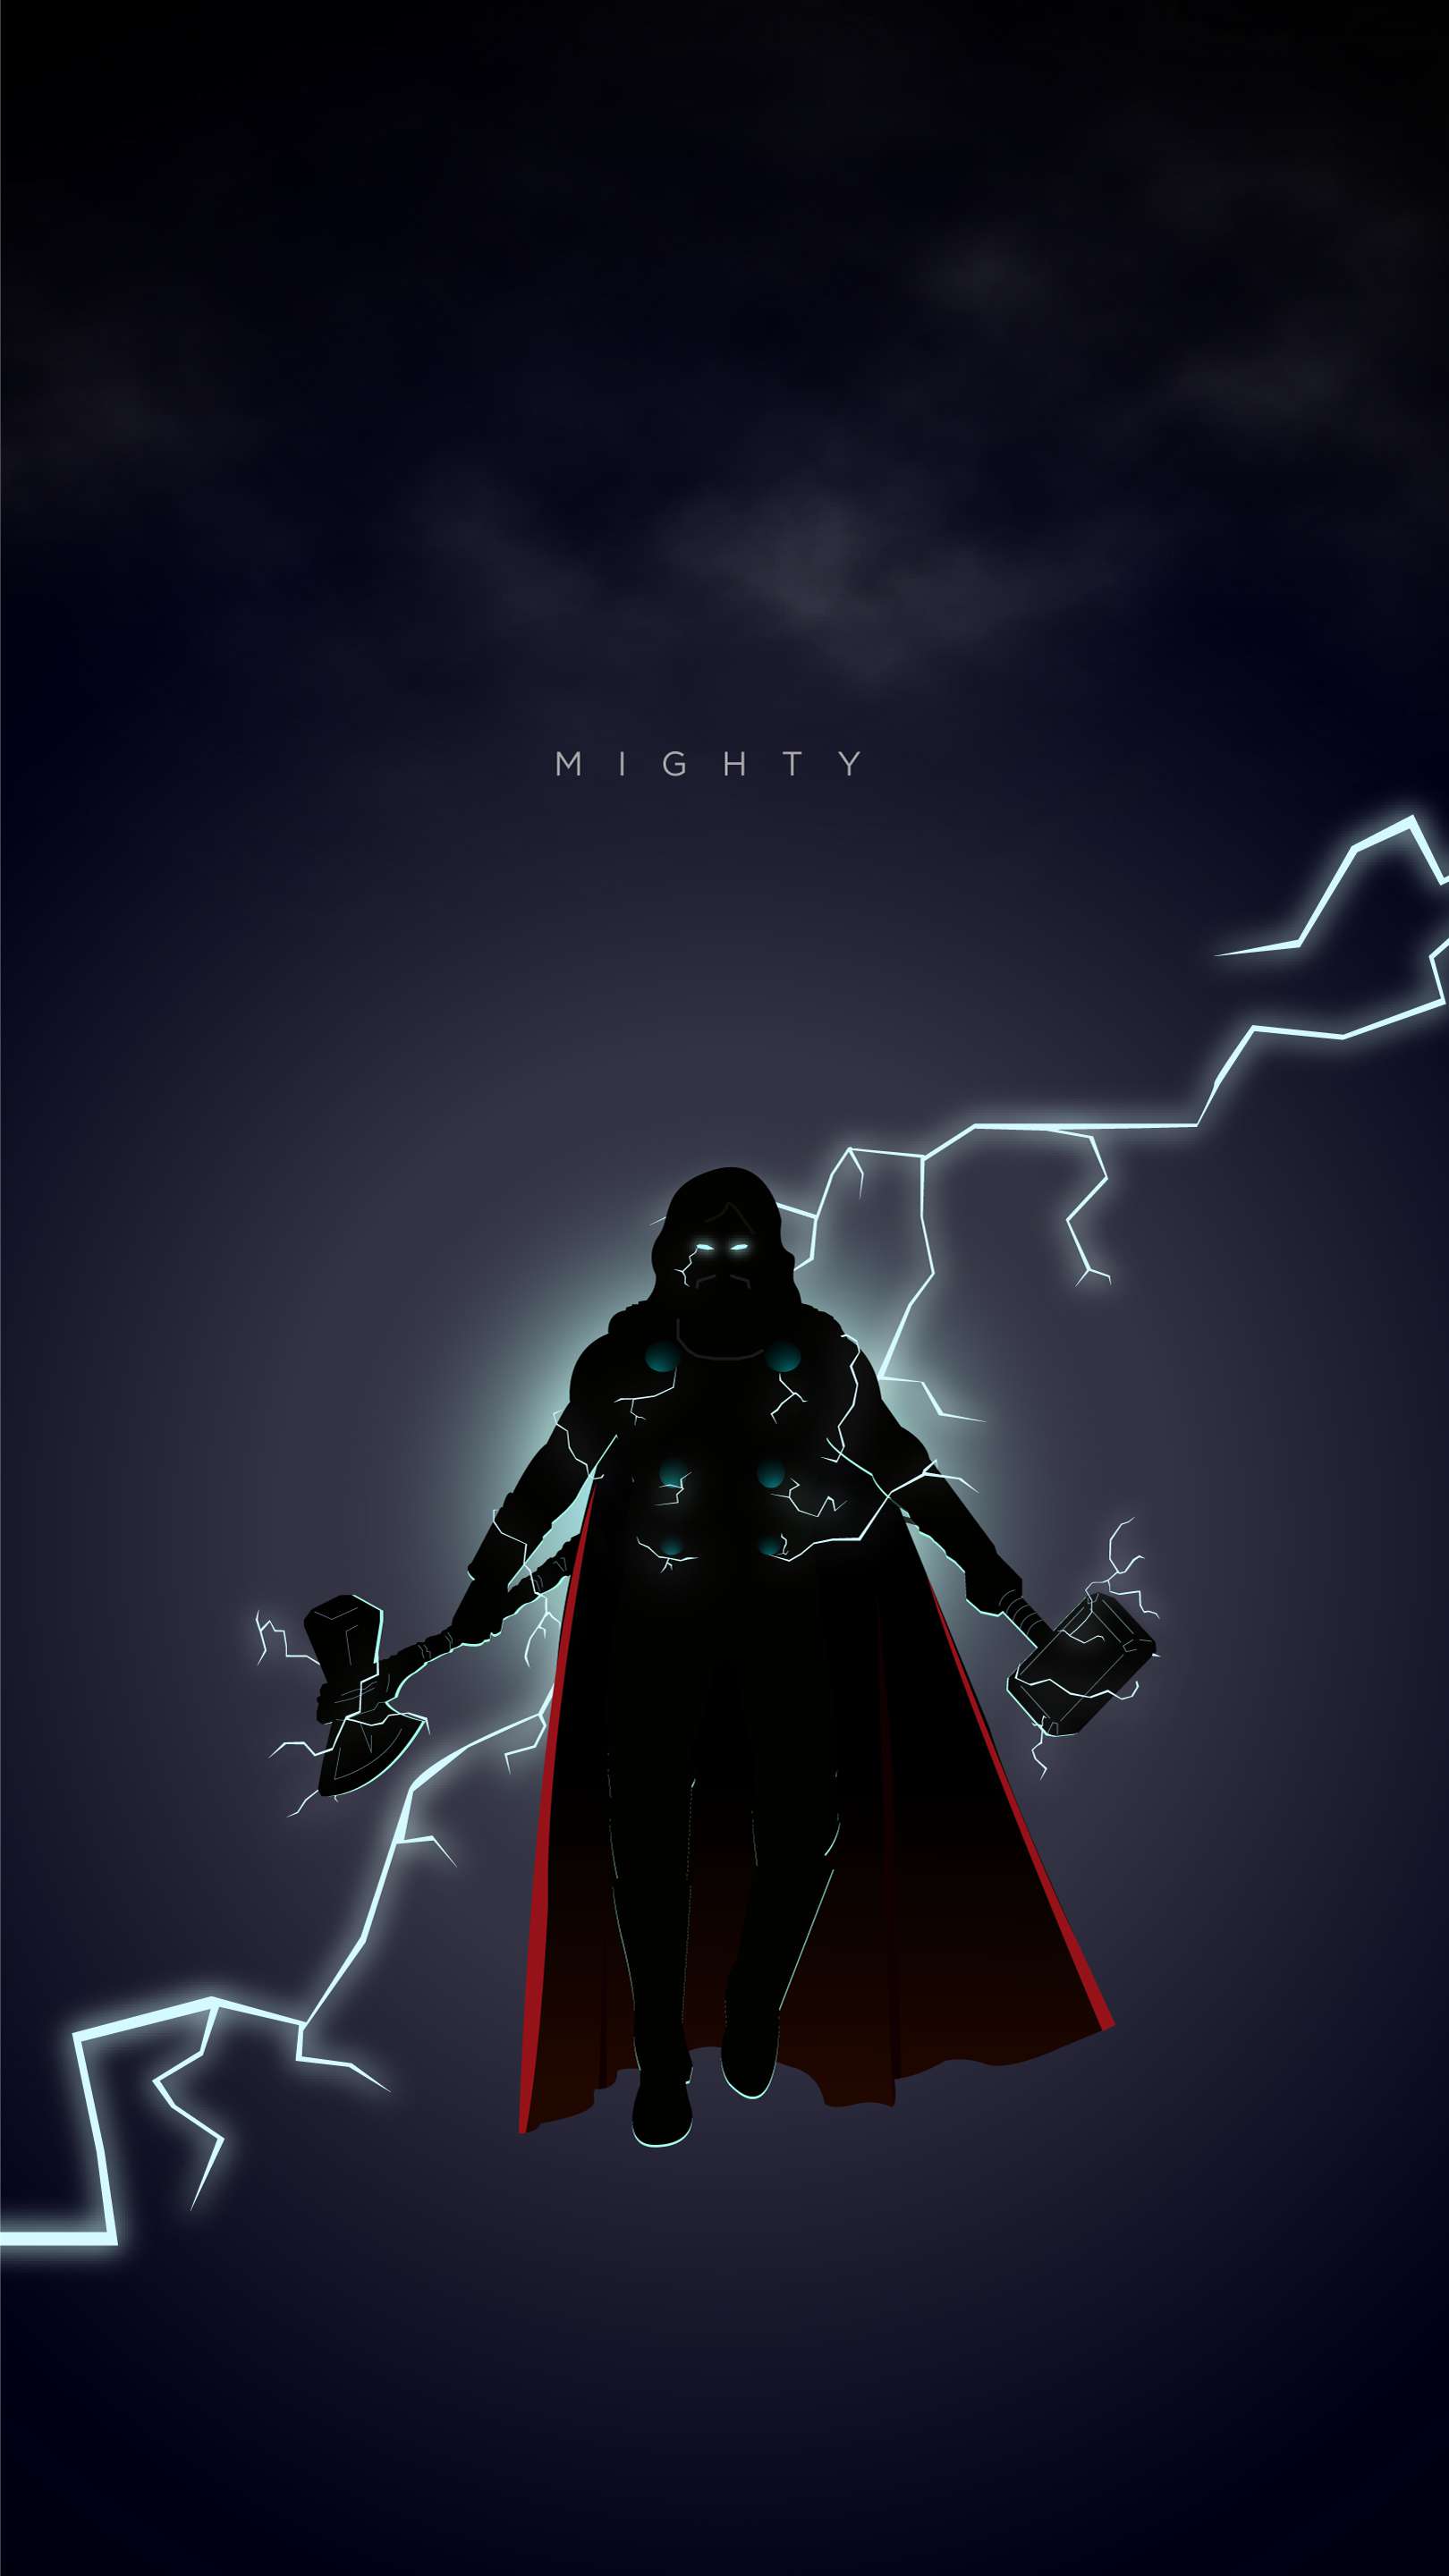 Thor From Endgame IPhone Wallpaper - IPhone Wallpapers : iPhone Wallpapers